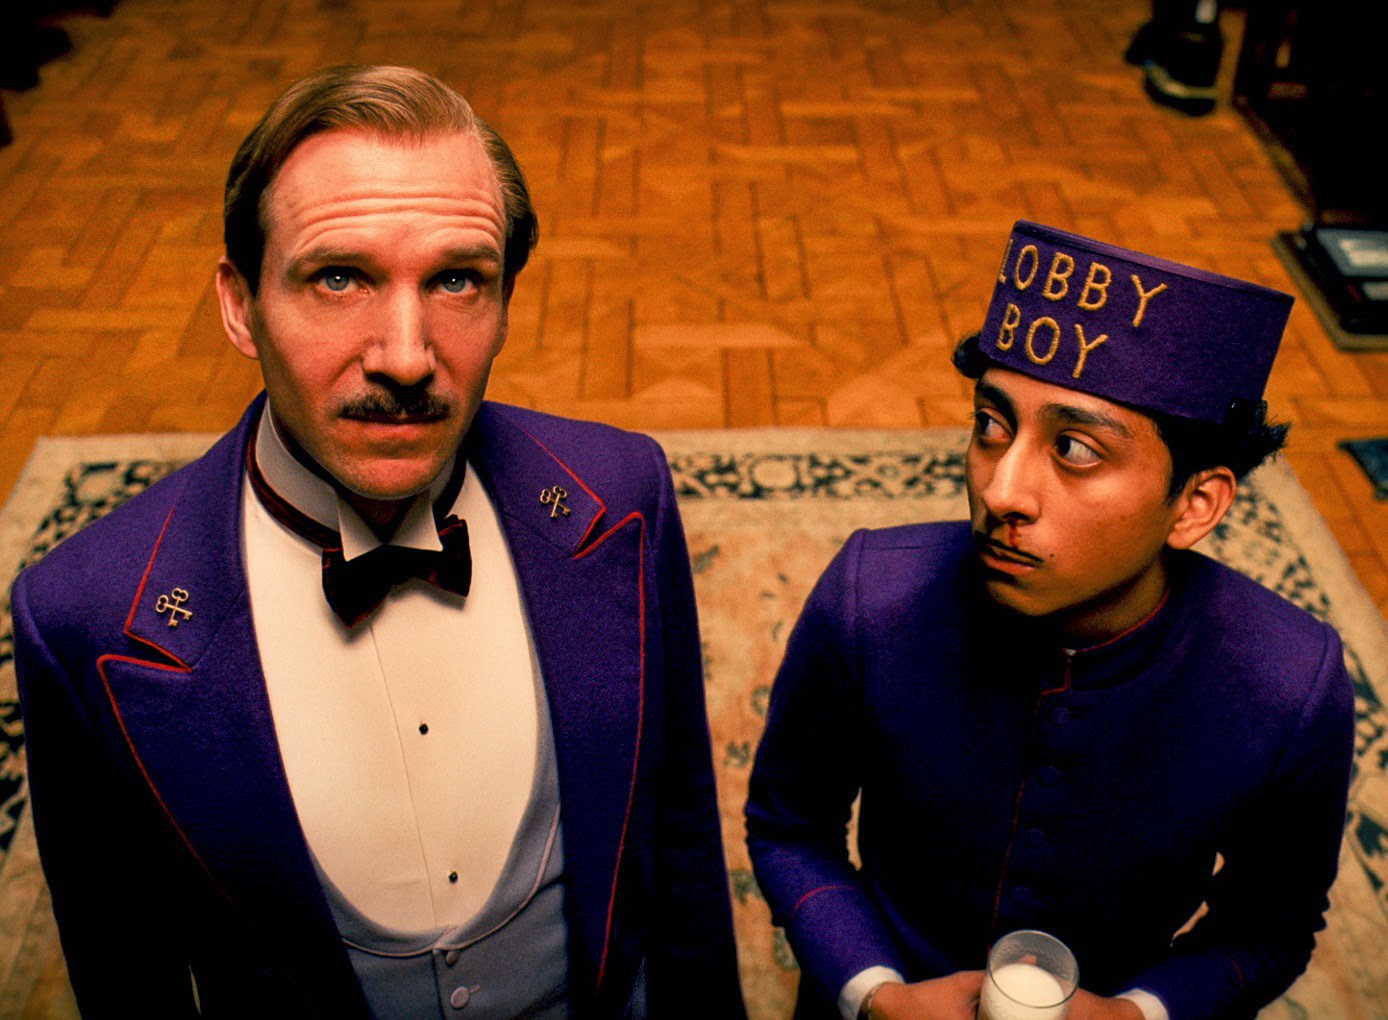 The Grand Budapest Hotel Backgrounds, Compatible - PC, Mobile, Gadgets| 1388x1020 px